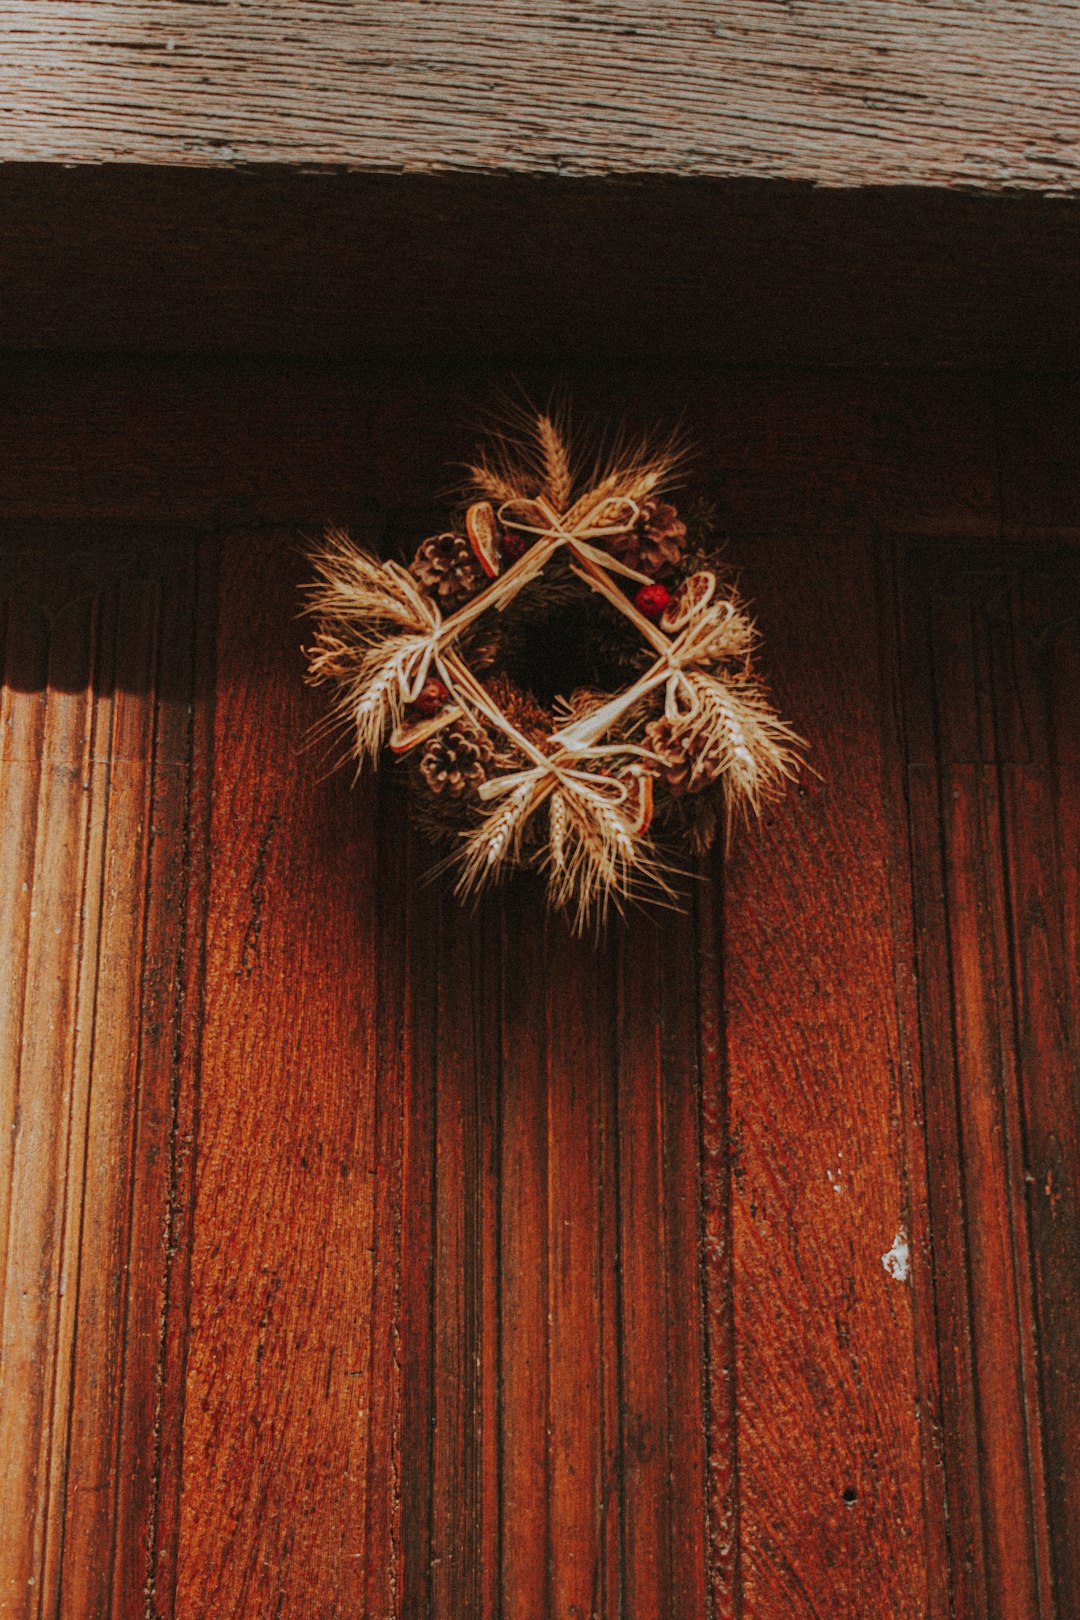 brown and white wreath on brown wooden wall